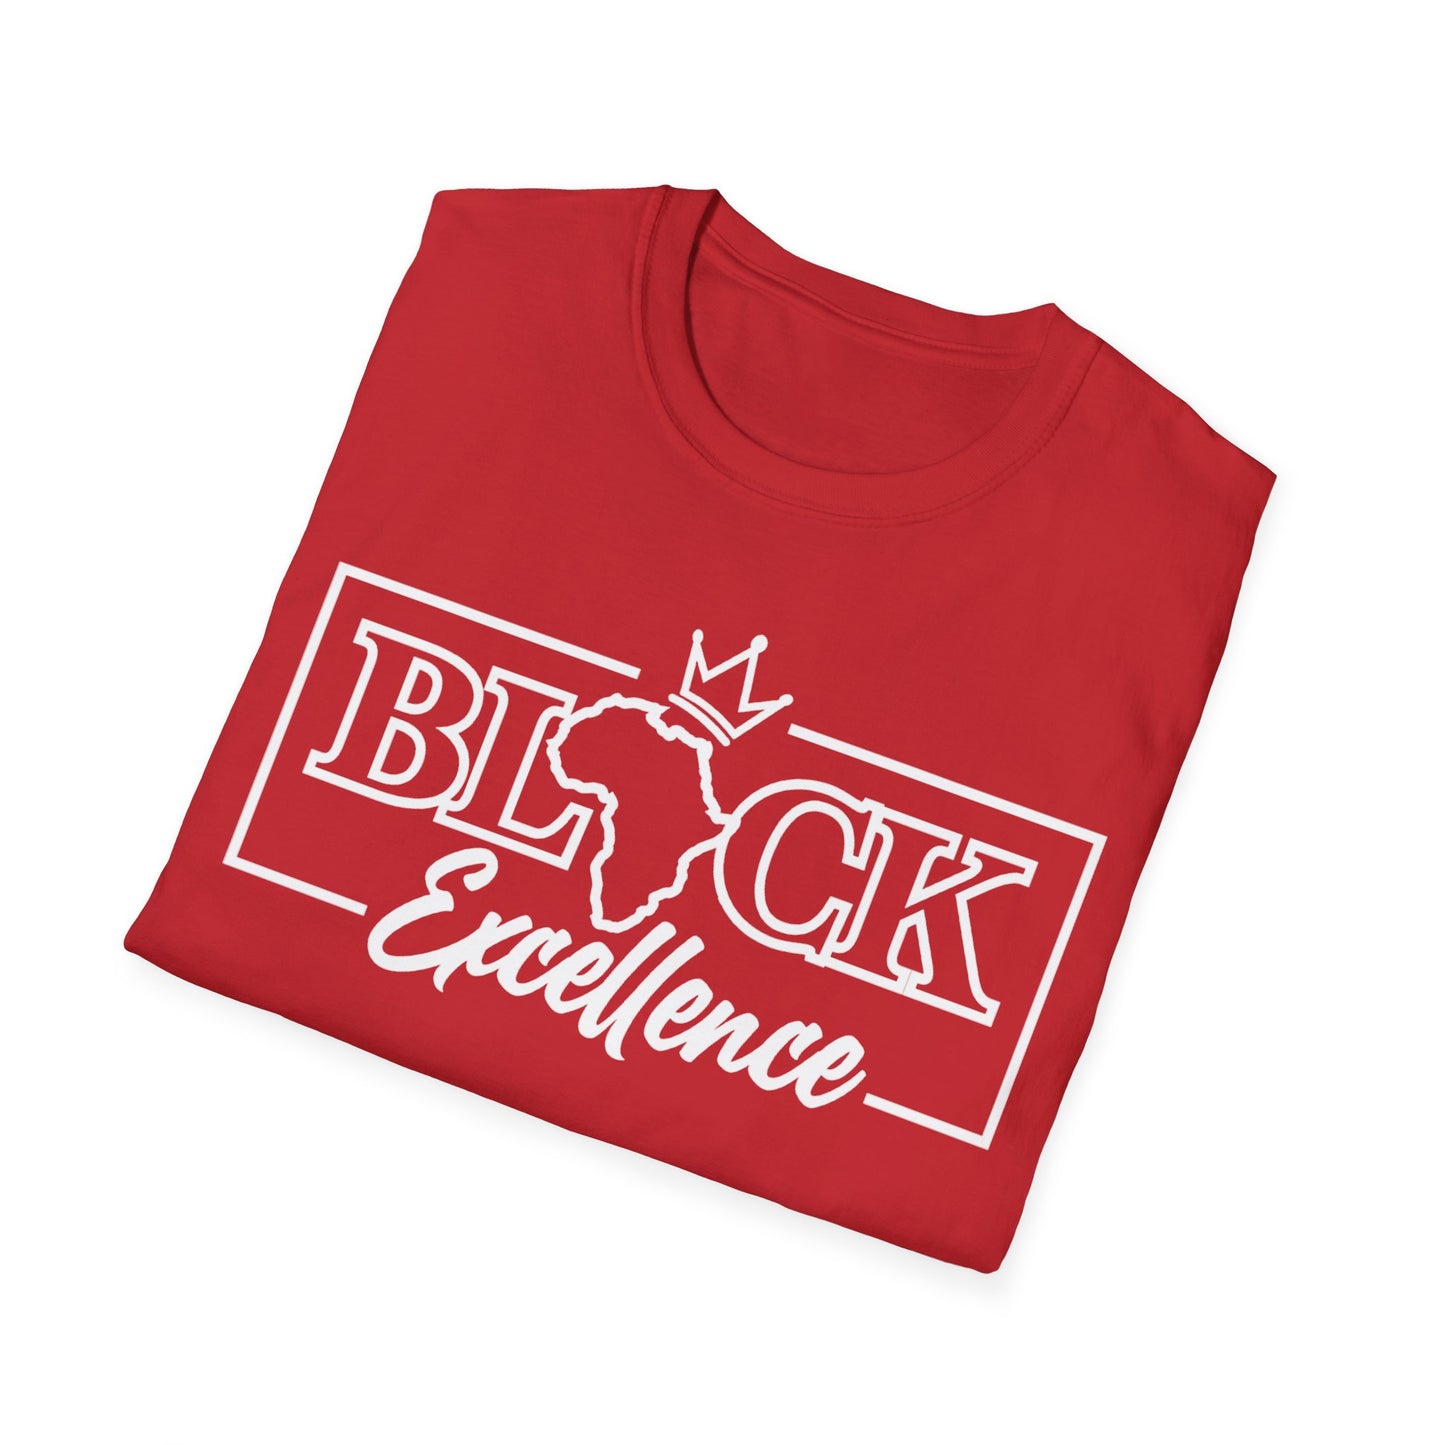 Black History Black Excellence Unisex Softstyle T-Shirt